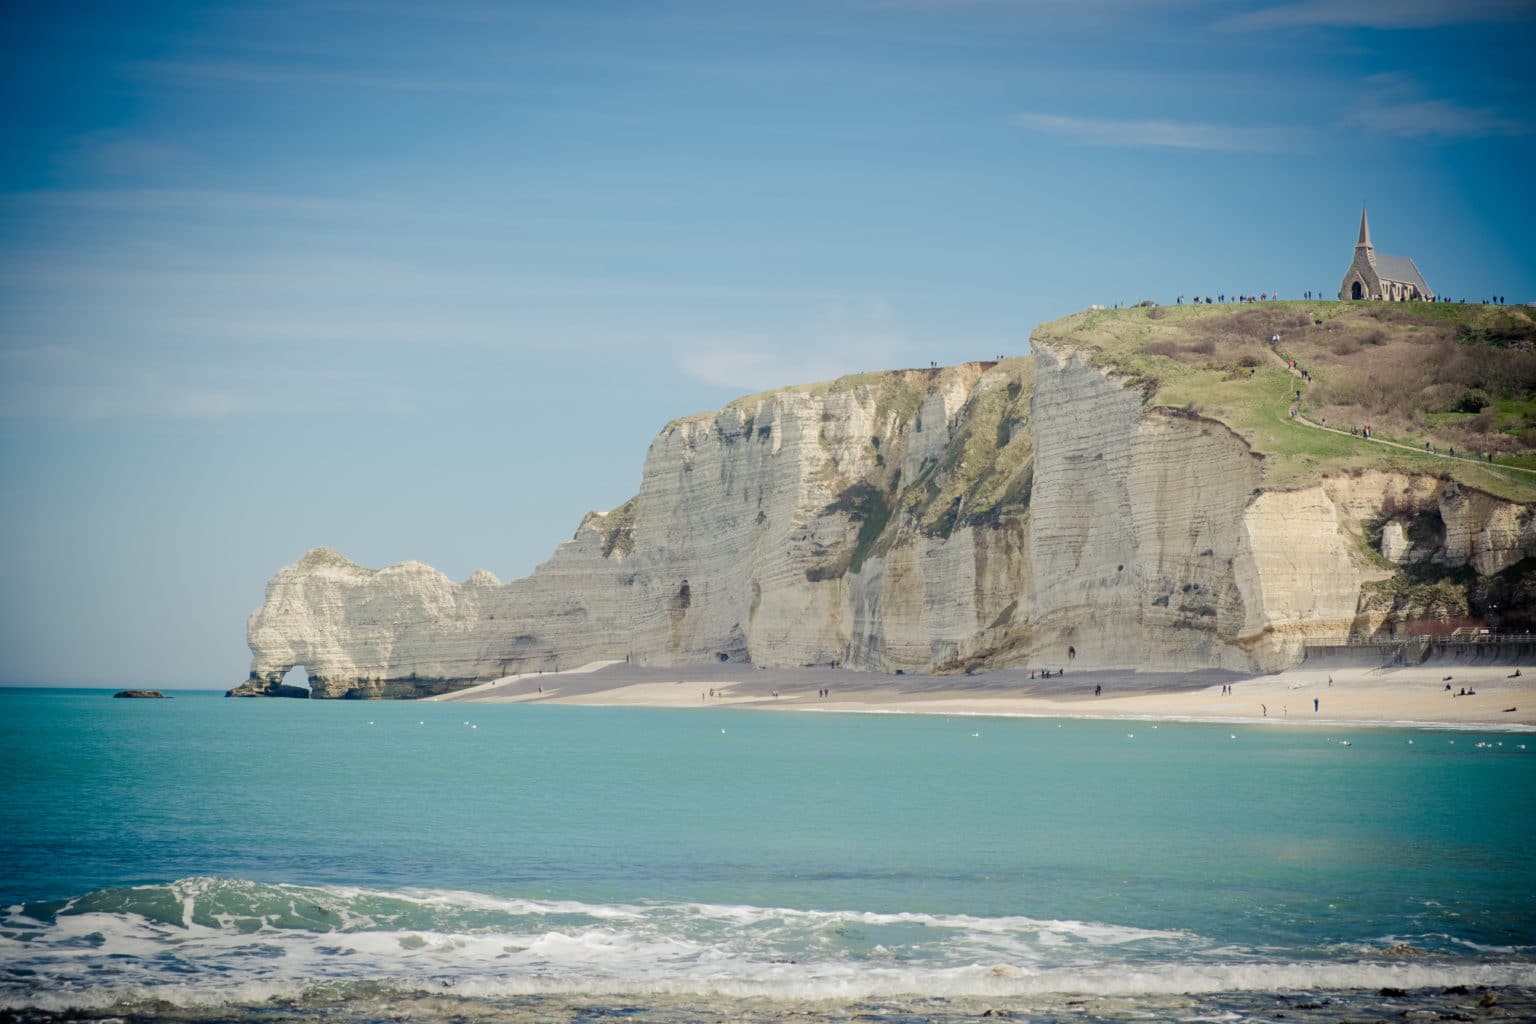 THE D DAY BEACHES IN NORMANDY